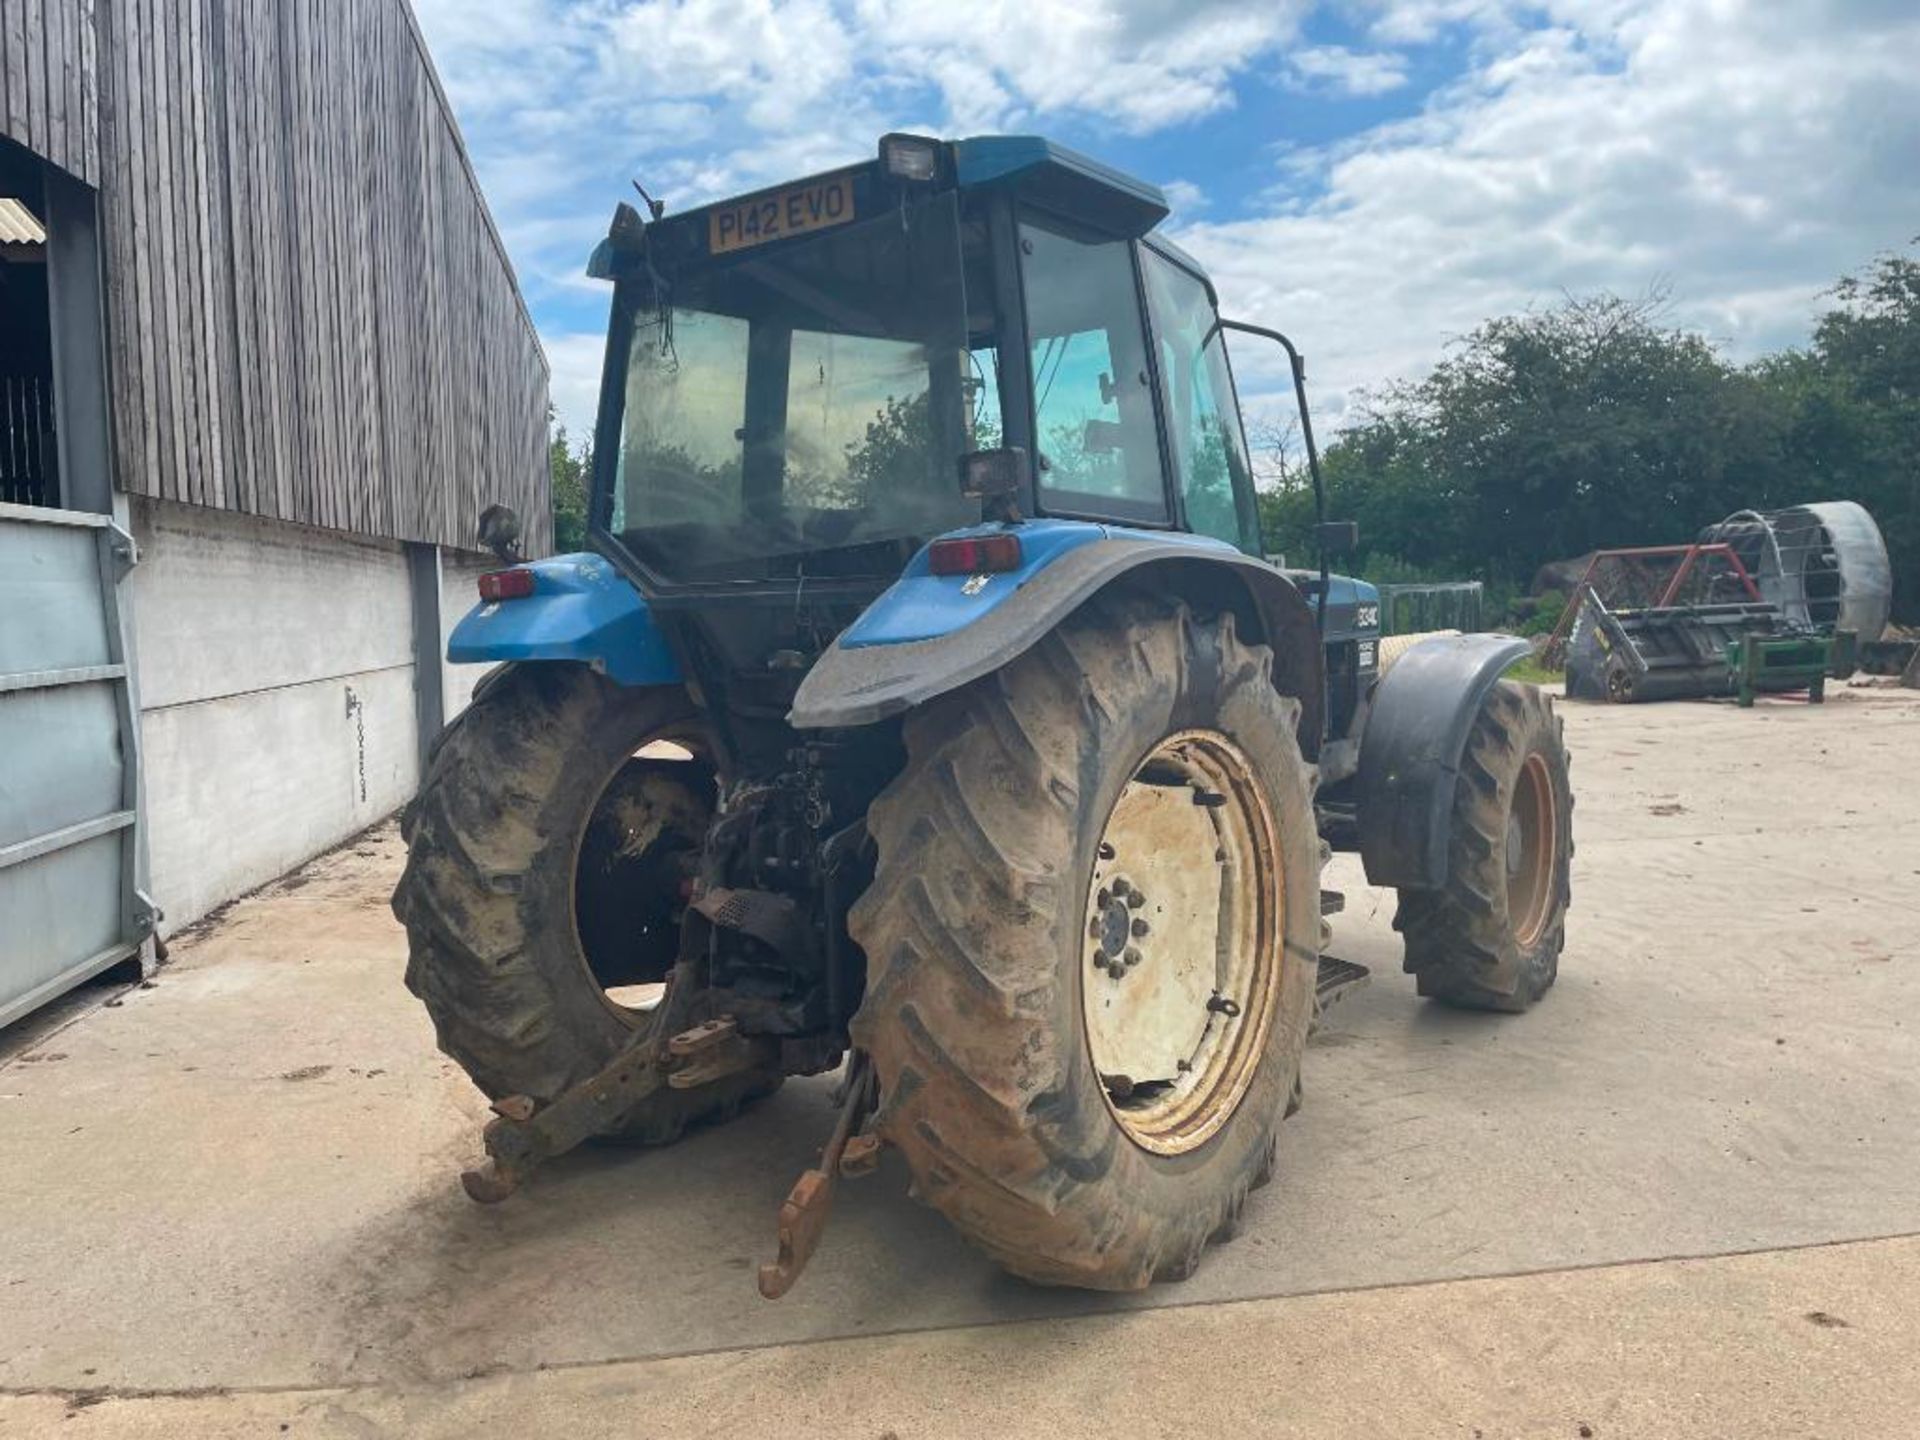 1997 New Holland 8340 4wd tractor with 2 manual spools on 14.9R28 front and 18.4R38 rear wheels and - Image 9 of 22